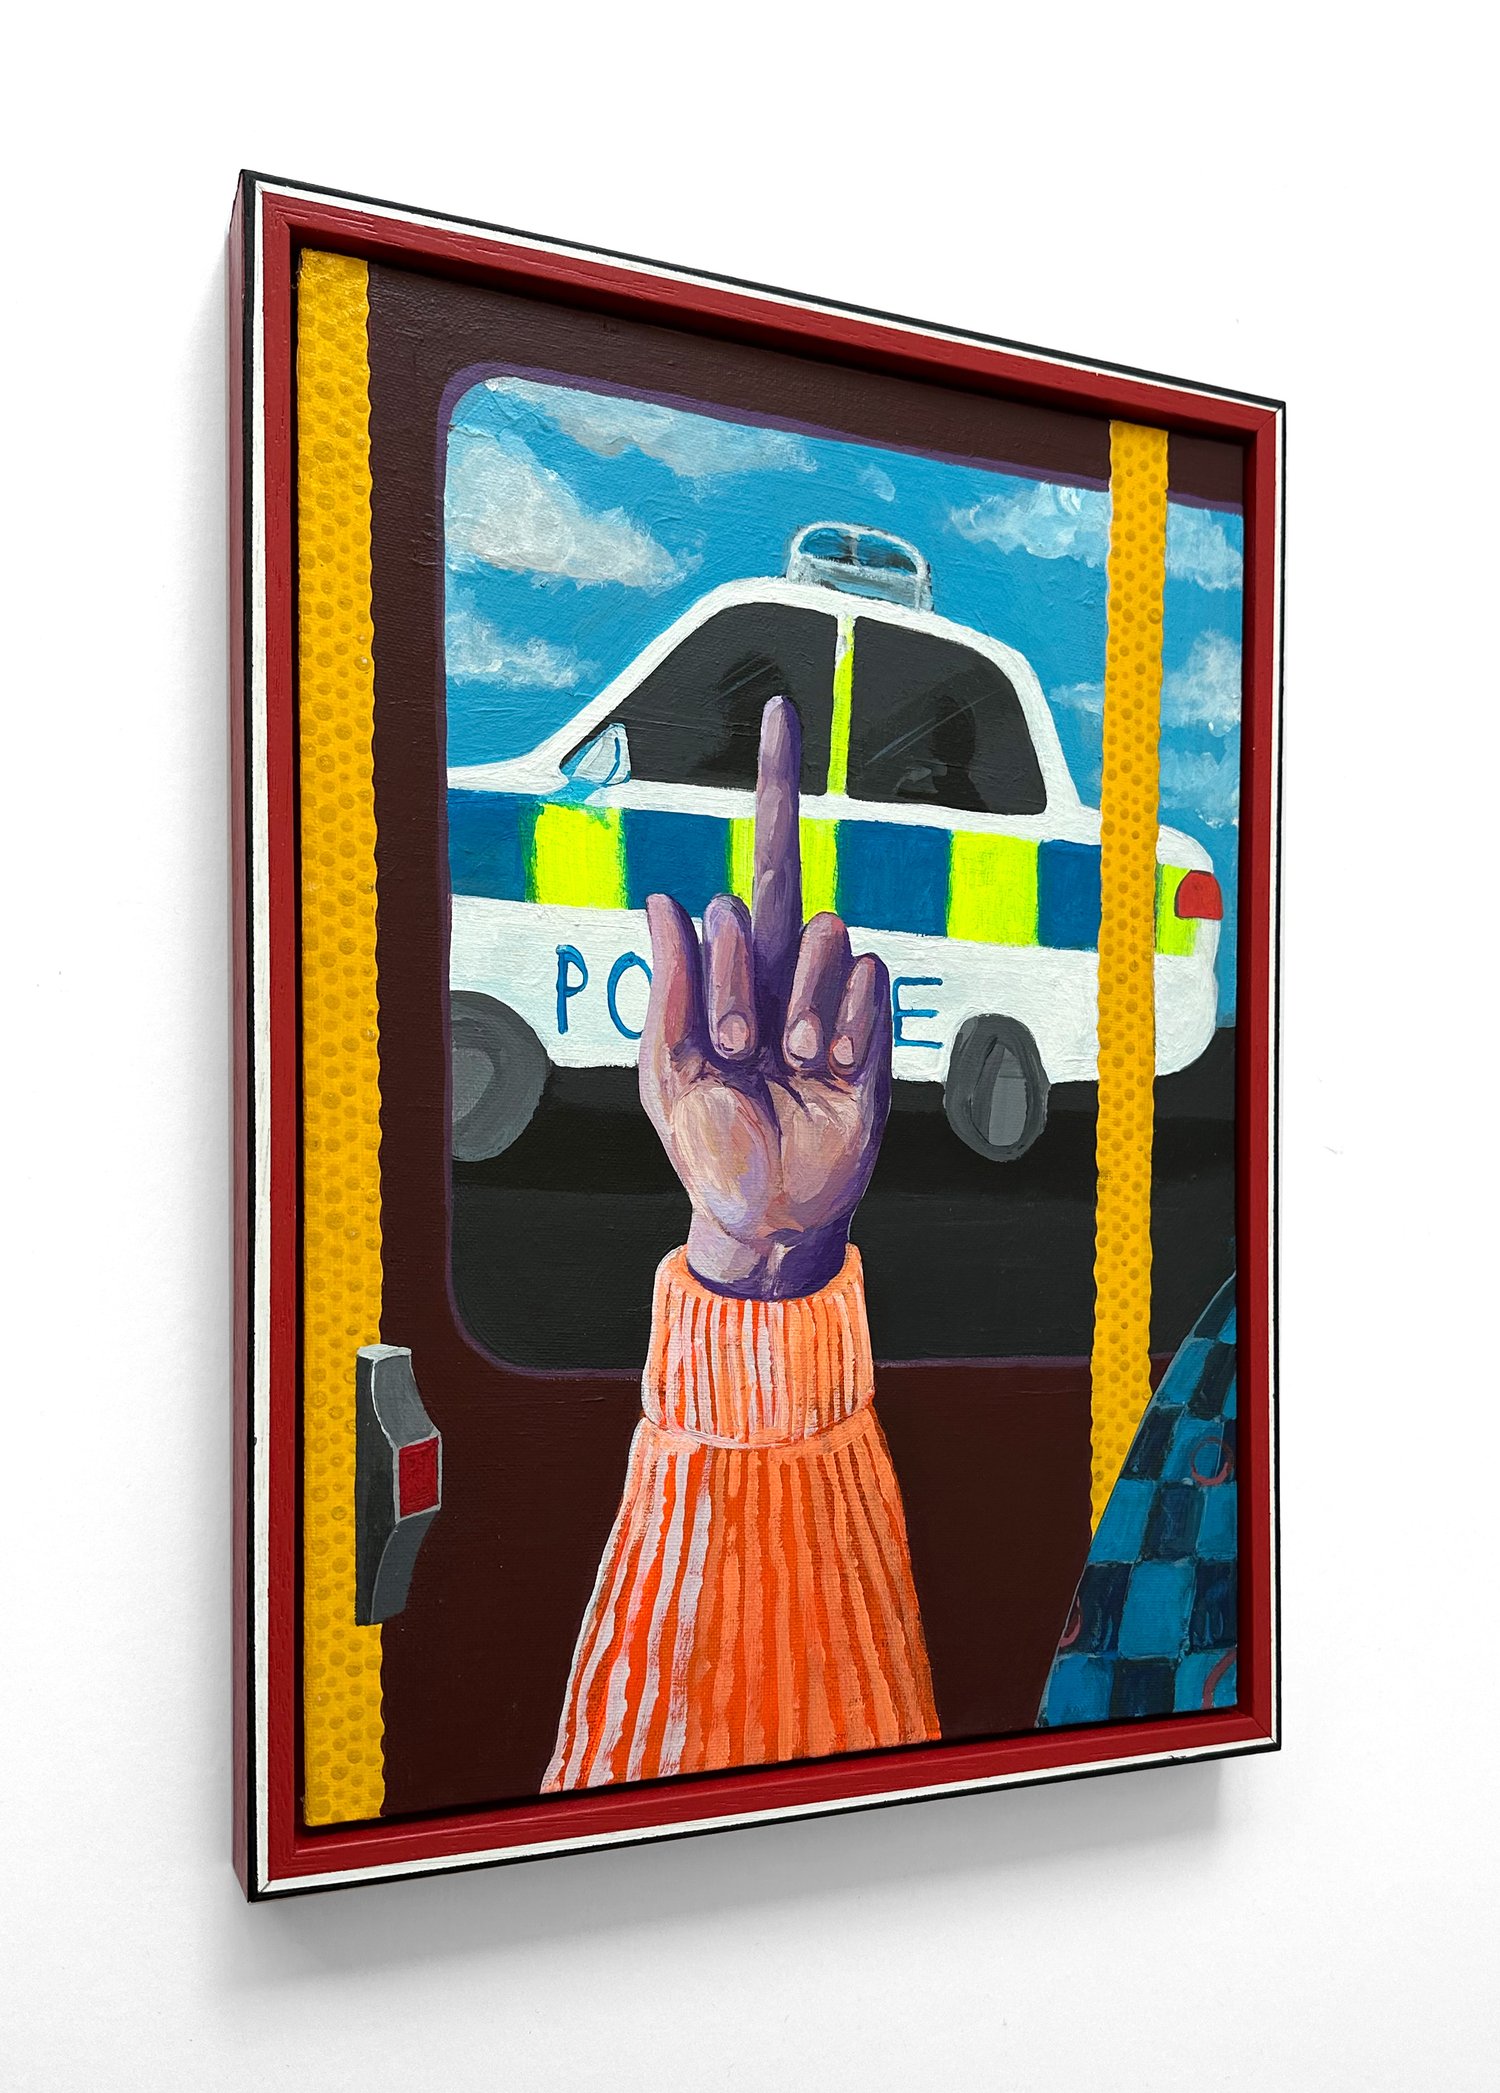 Image of ‘Cop Car Wave’ by EDWIN